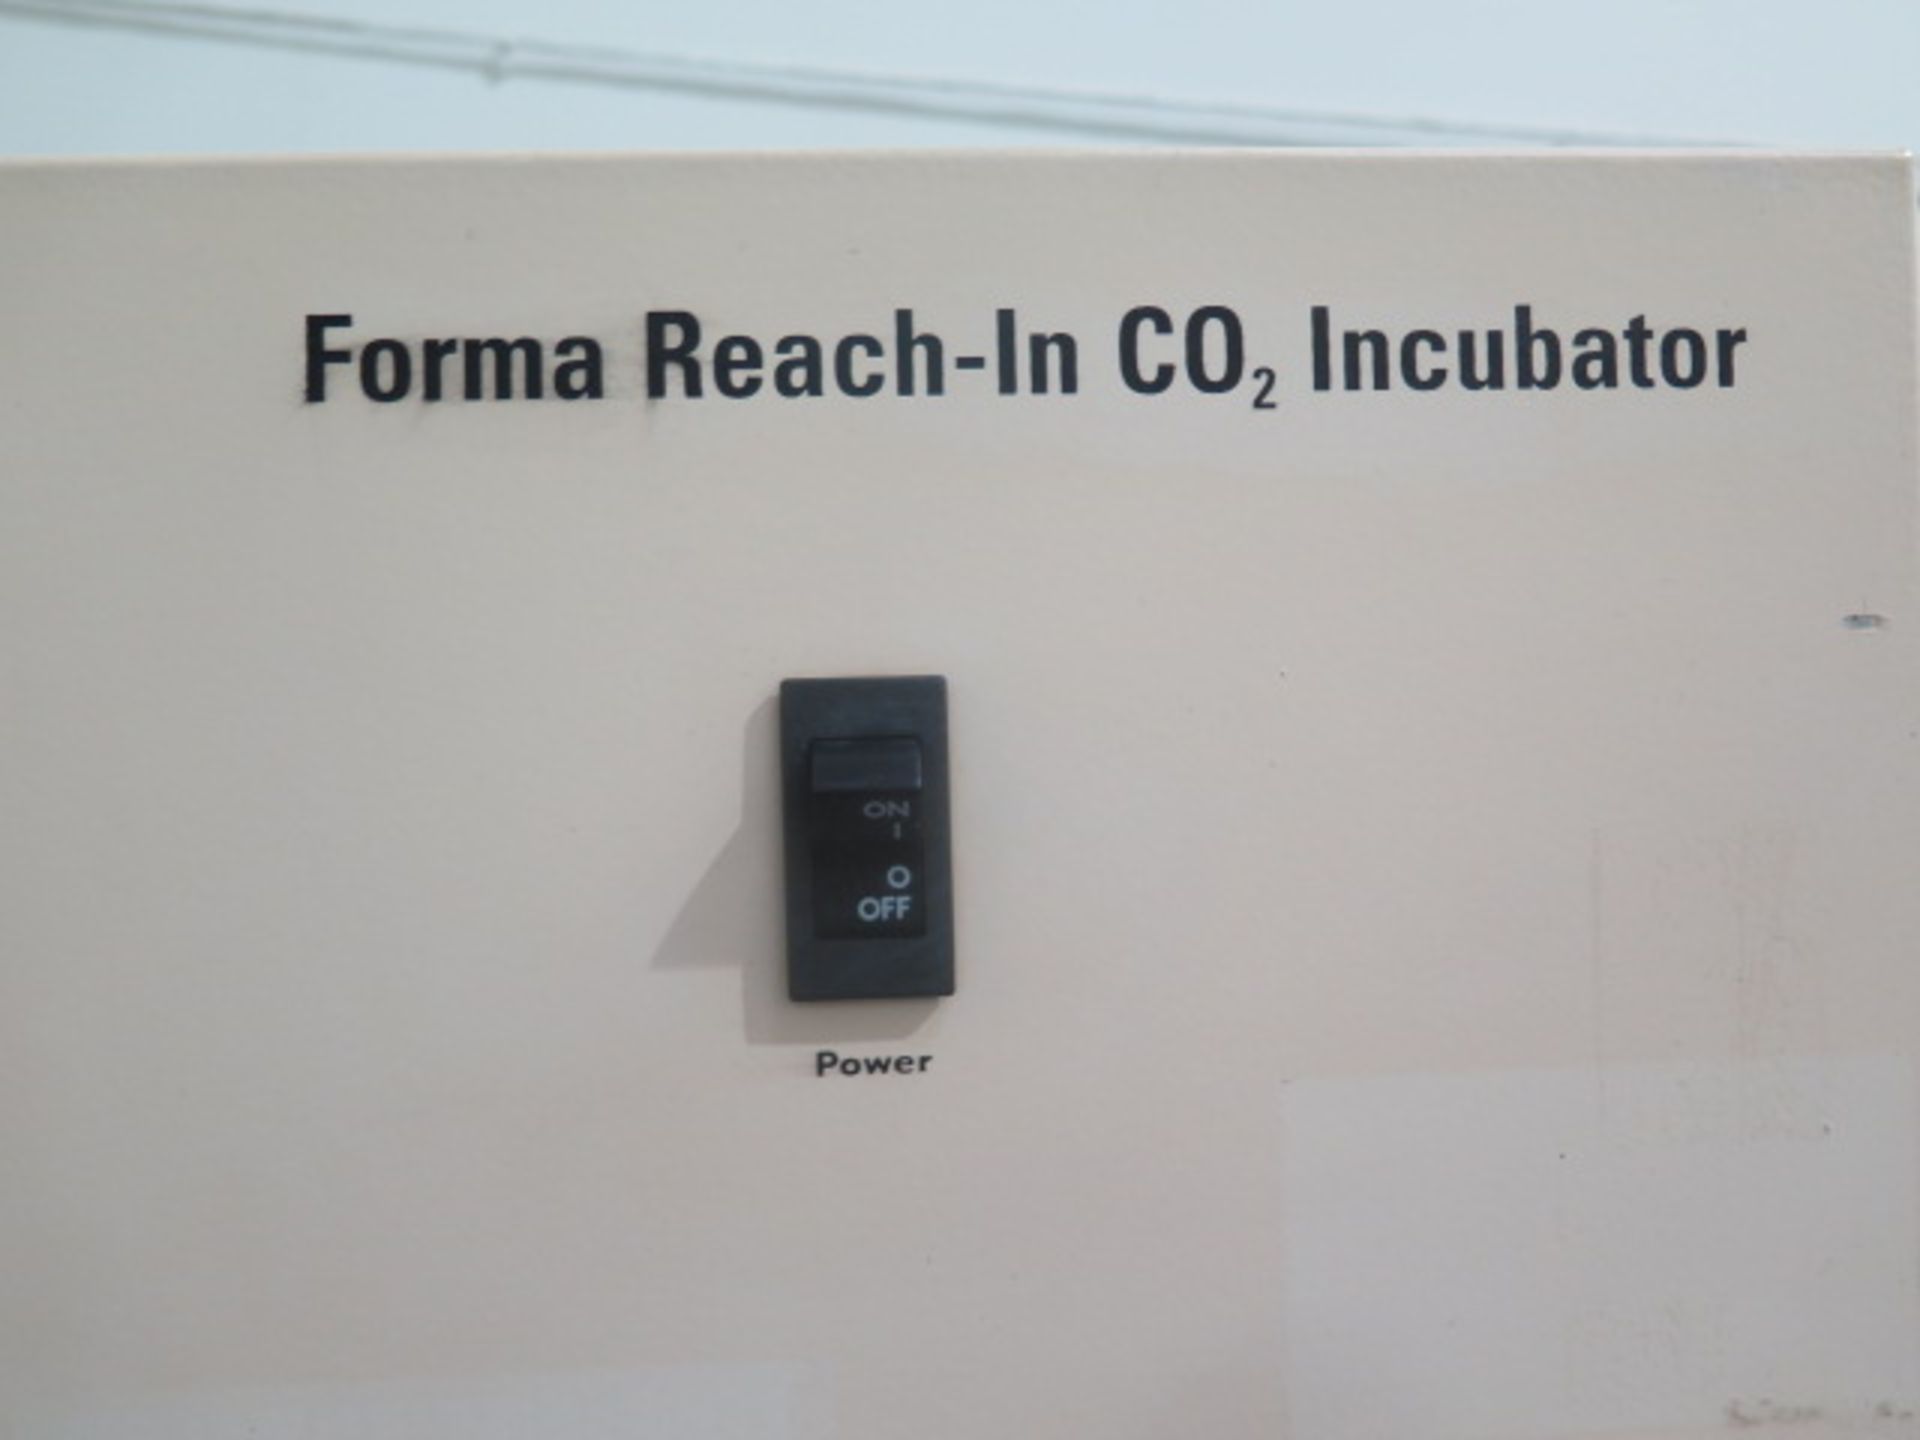 Thermo Scientific mdl. 3950 Forma Reach-In CO2 Incubator s/n 309842-1827 (SOLD AS-IS - NO WARRANTY) - Image 7 of 8